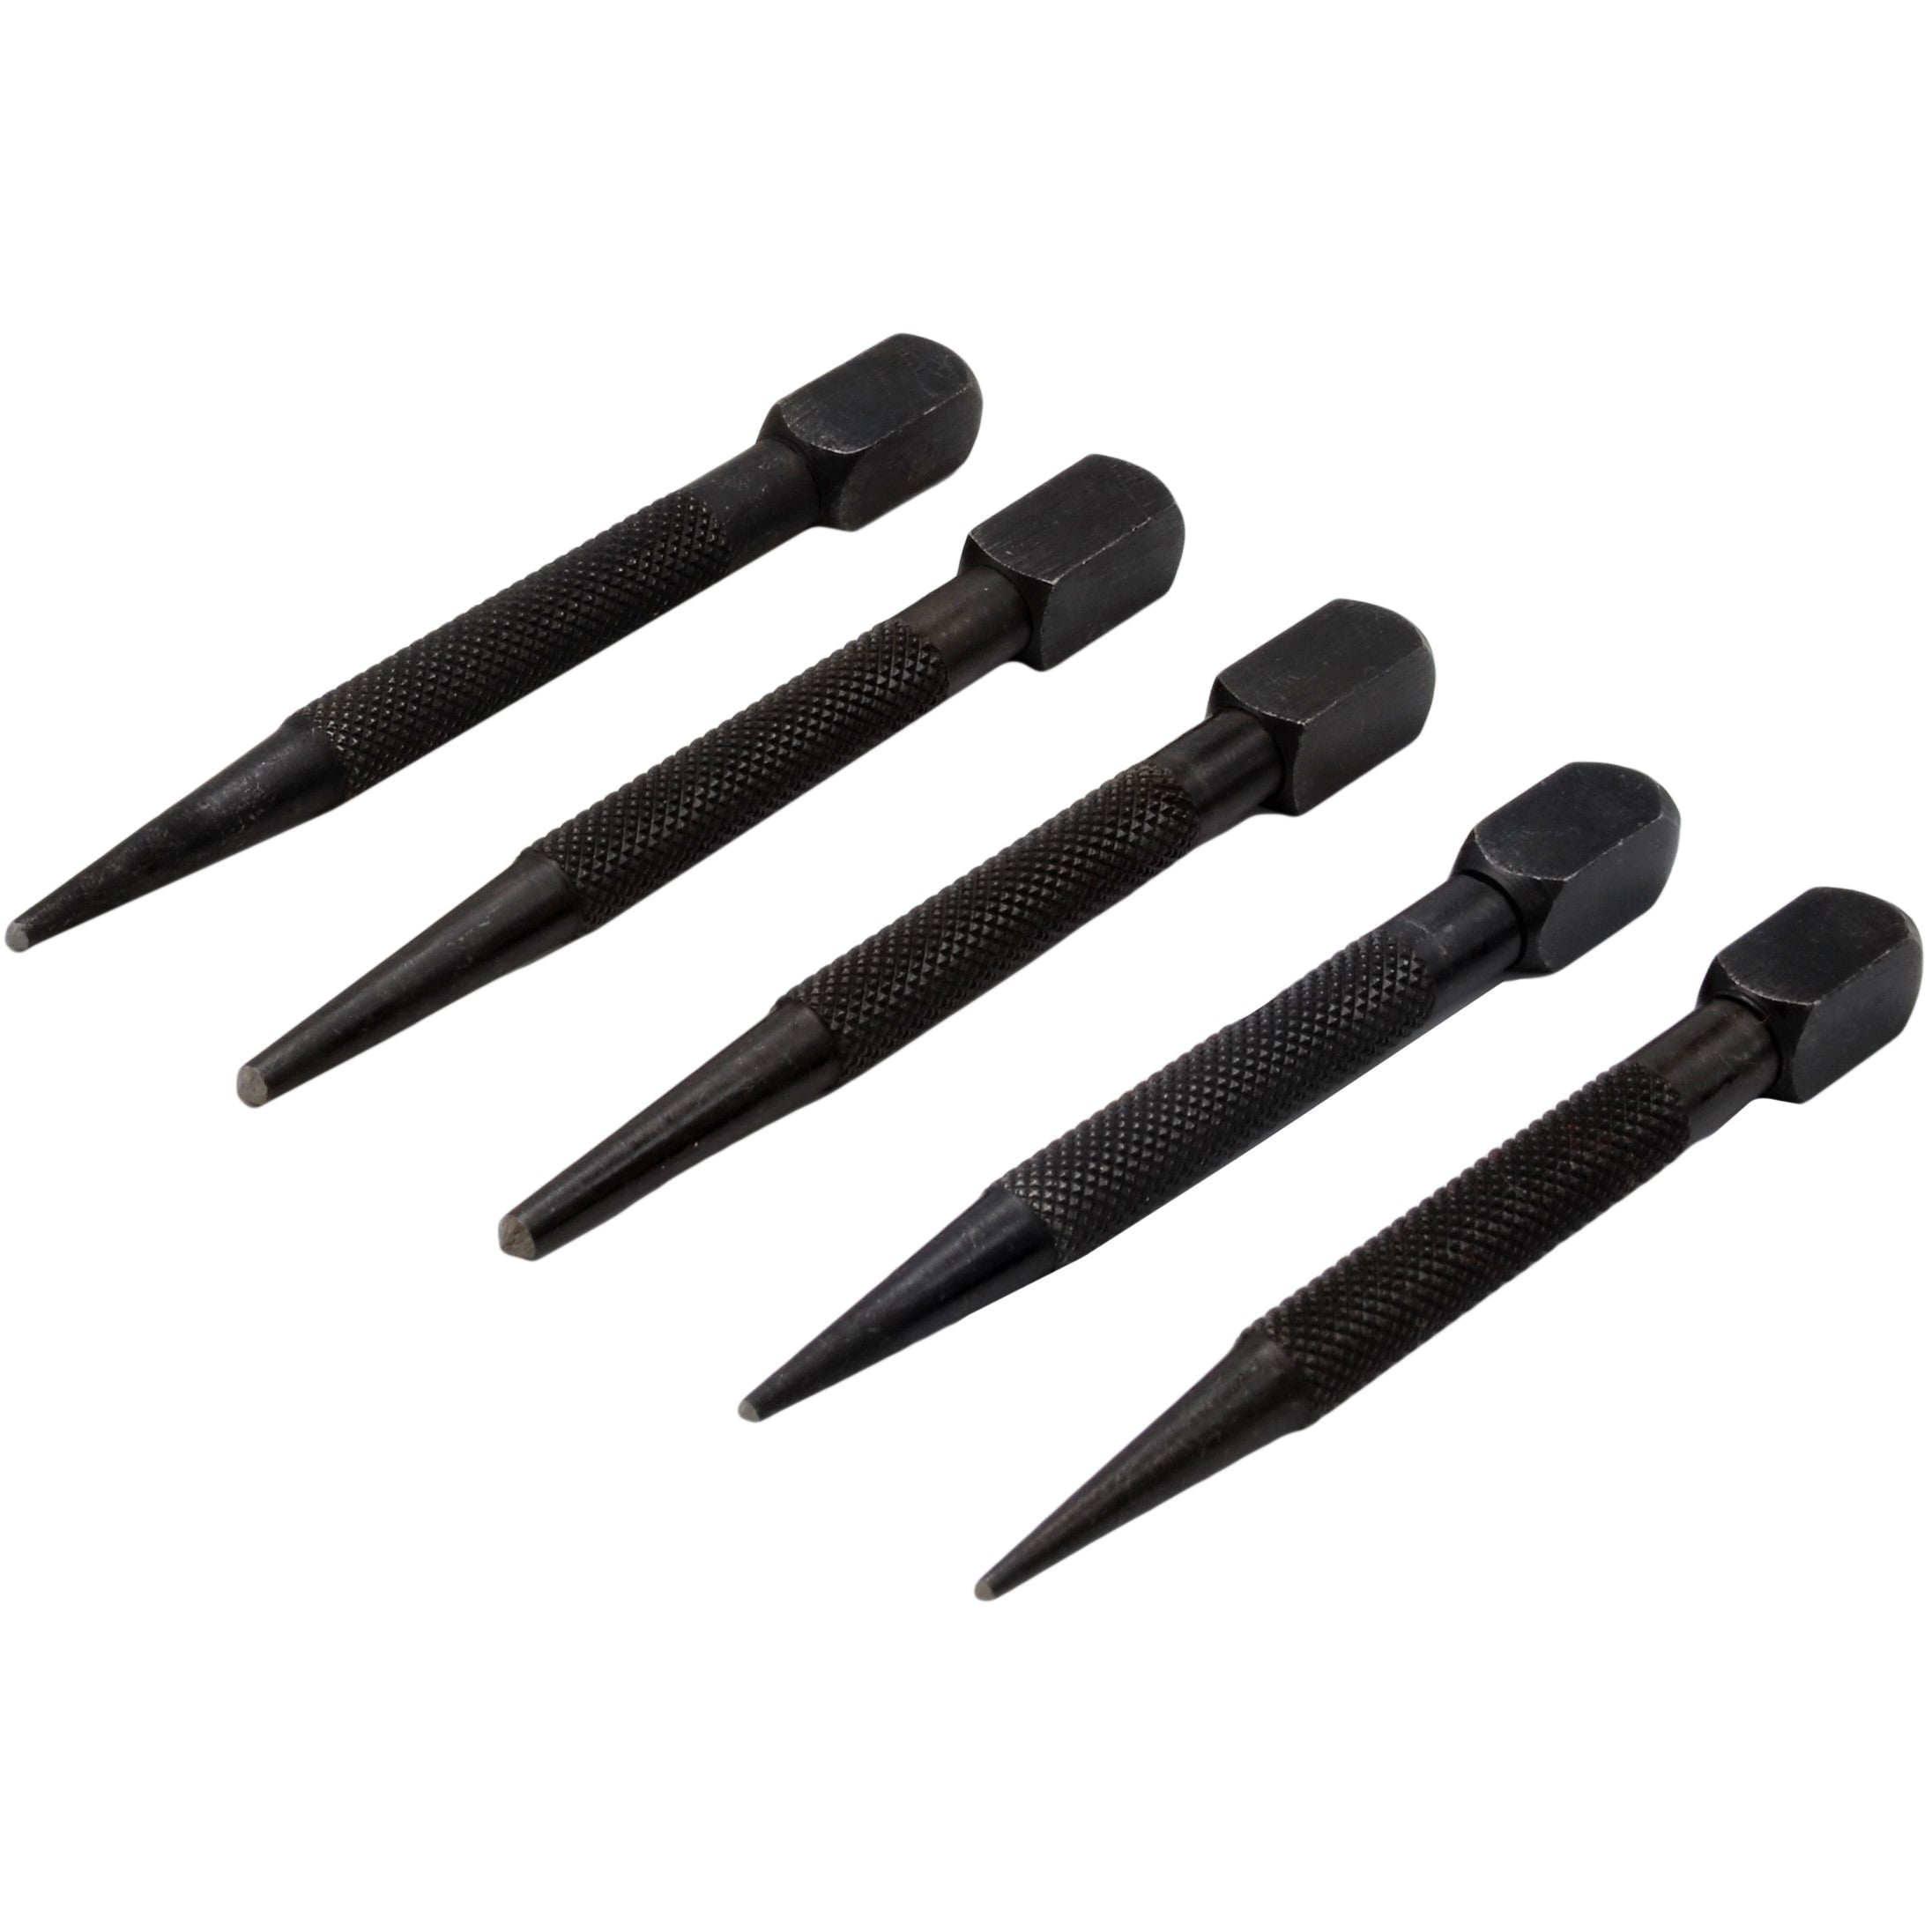 Set of 5 Piece Square Head Centre Punches